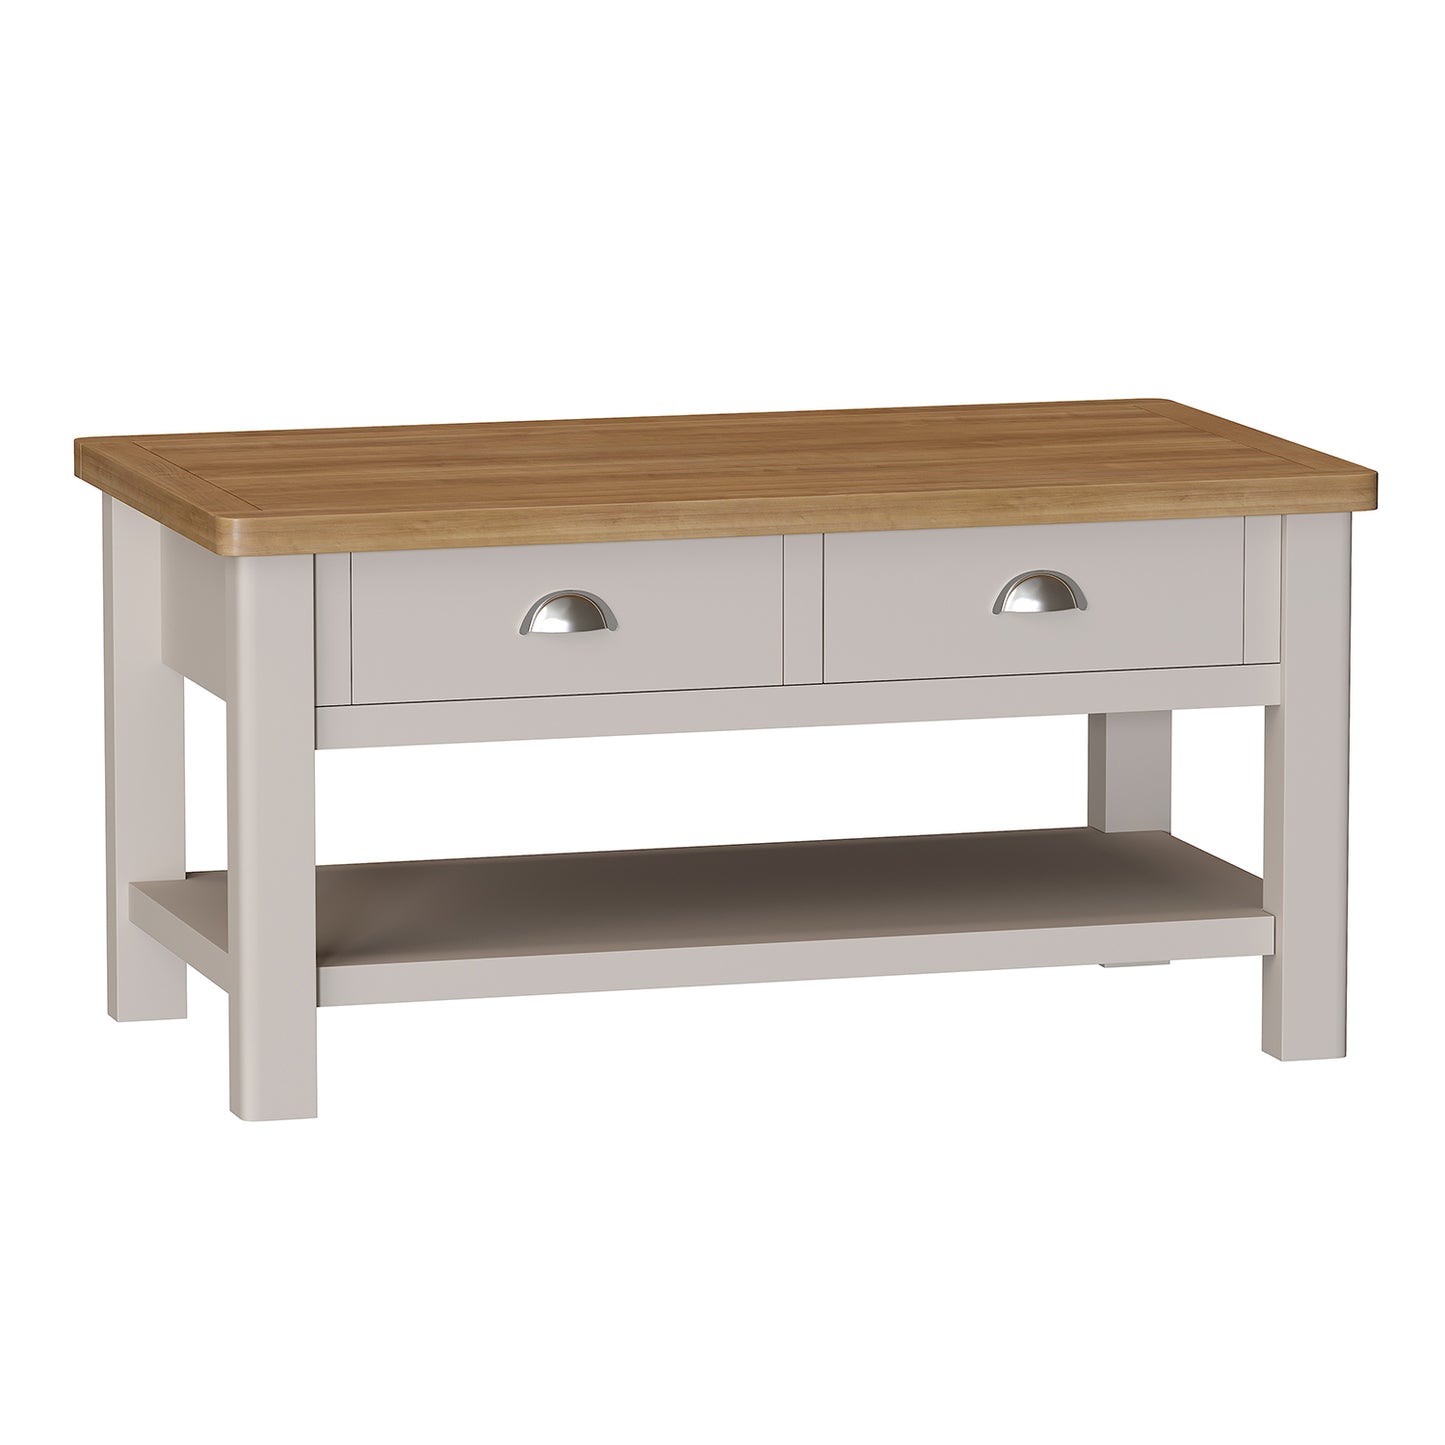 Pershore Painted Coffee Table - Large